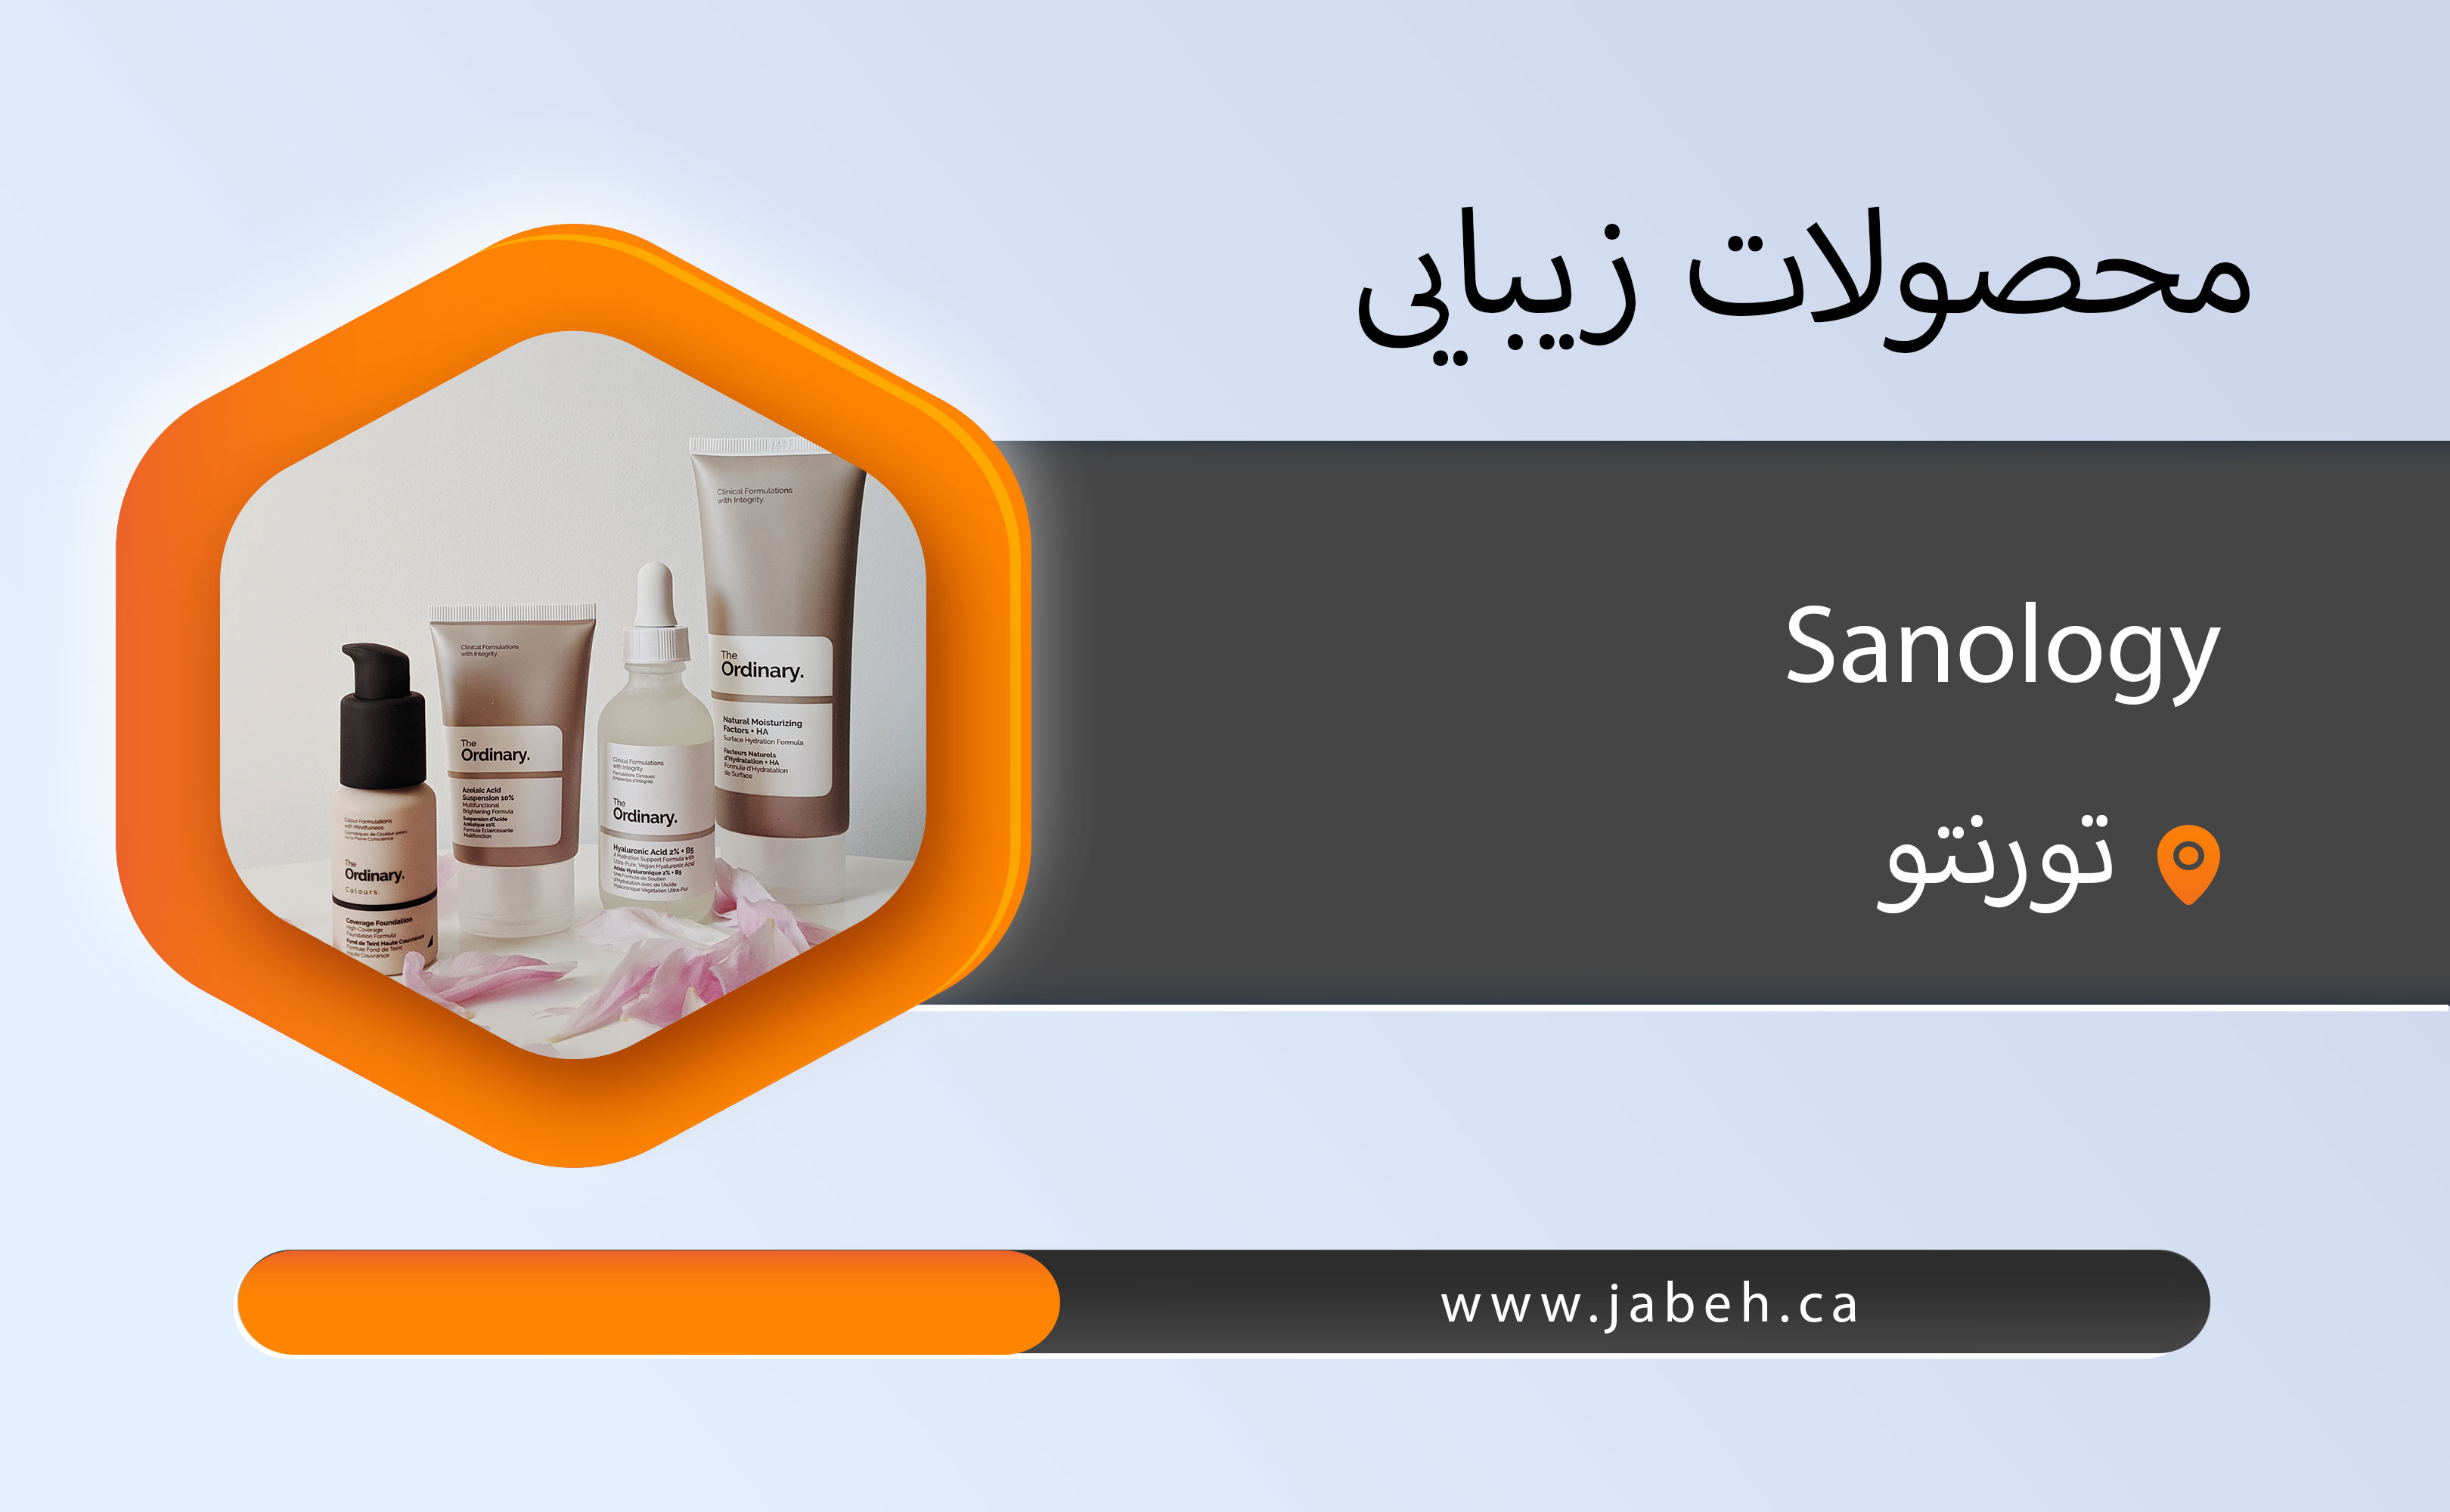 Sanology Beauty Products in Toronto